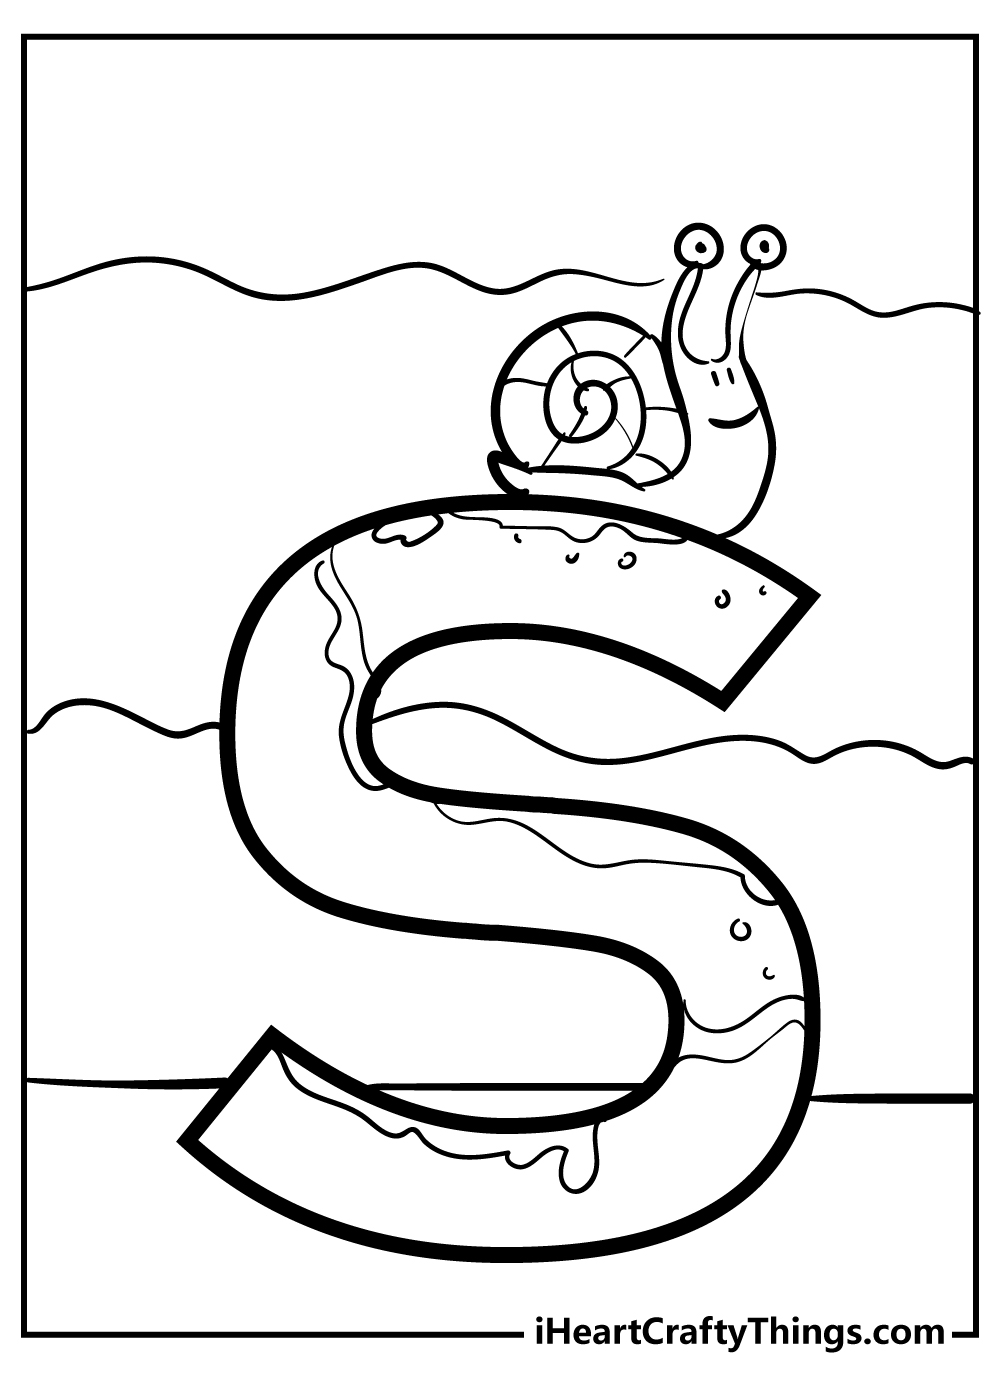 Letter S Coloring Pages free pdf download